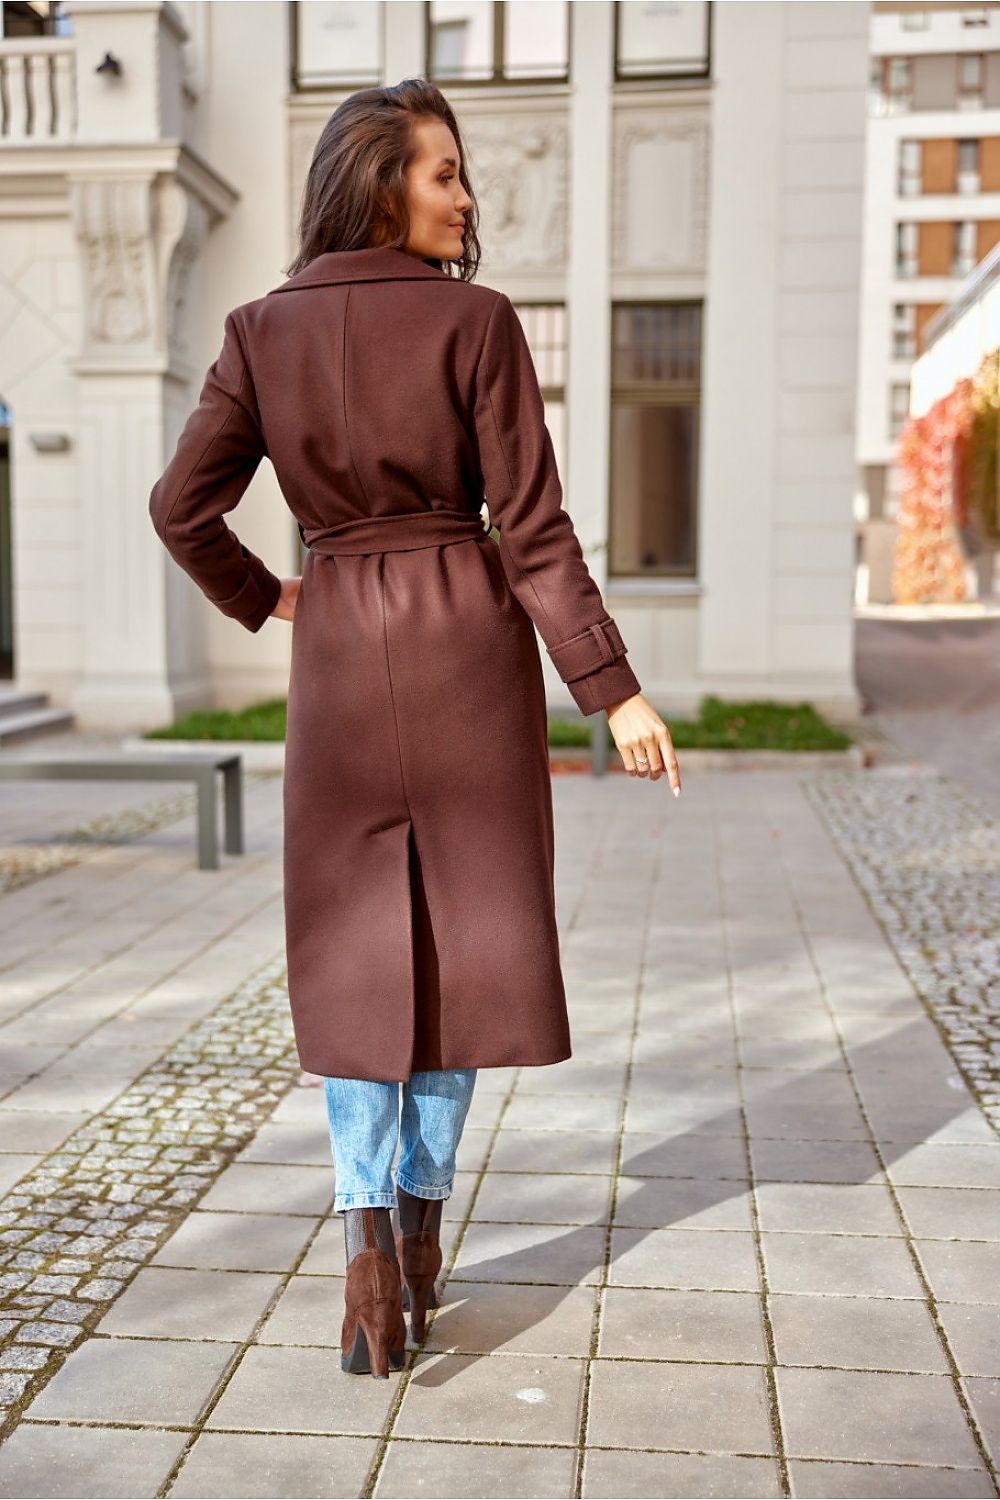 Livvy Long Downtown Coat - Brown